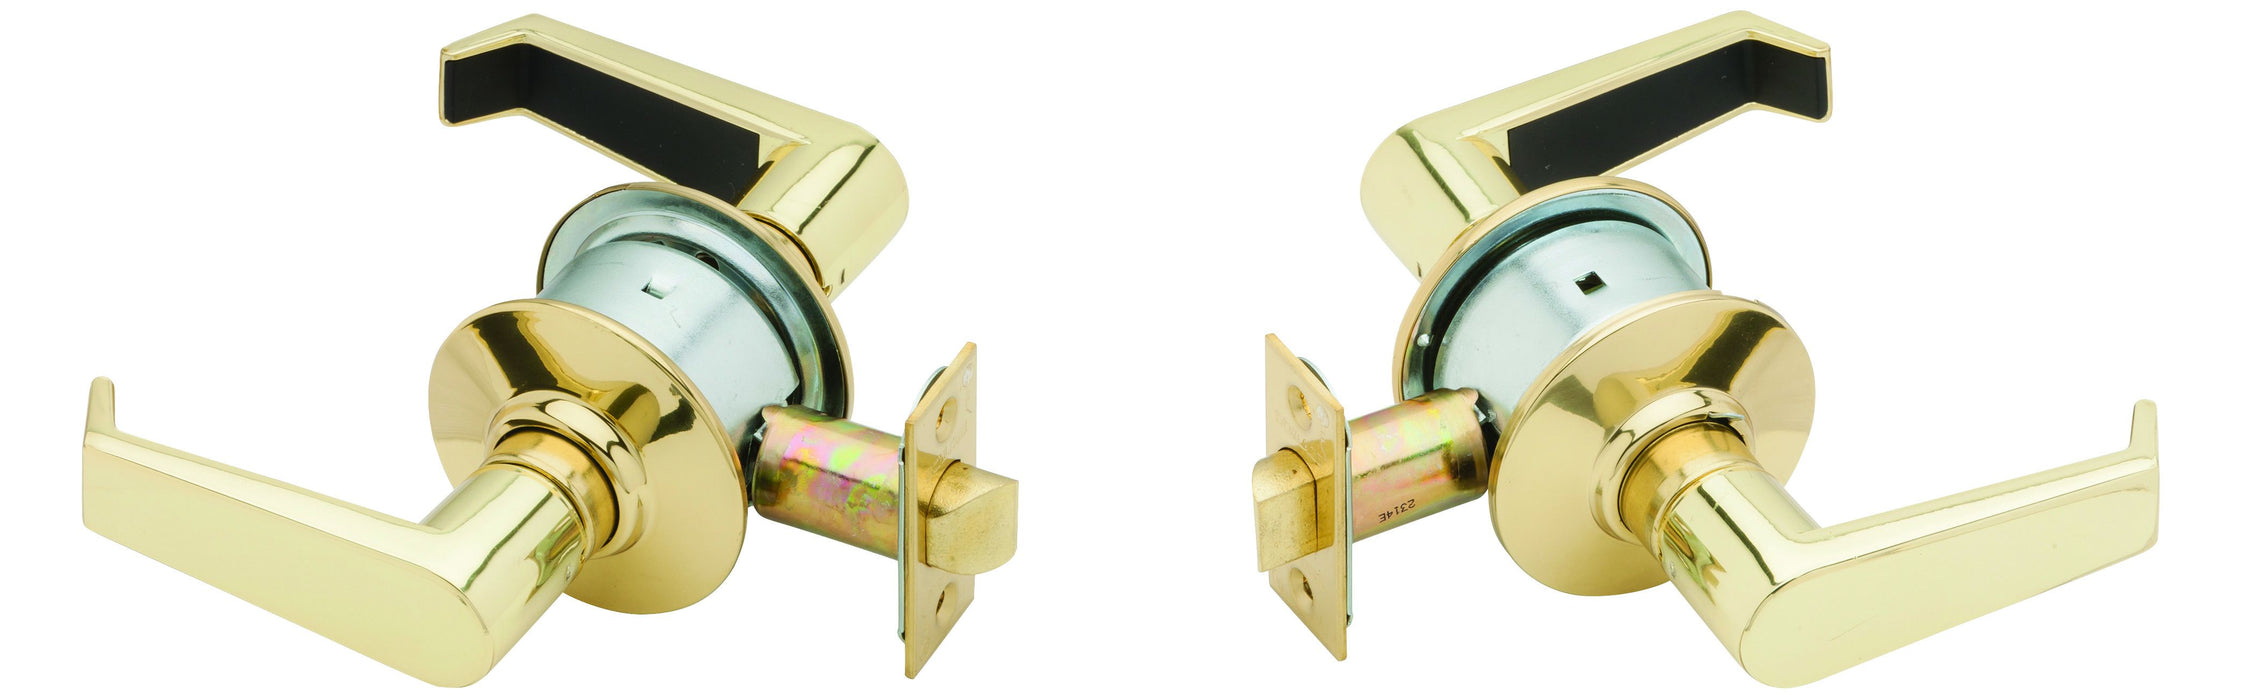 Schlage Commercial A10LEV605 A Series Passage Levon Lock with 11116 Latch 10001 Strike Bright Brass Finish